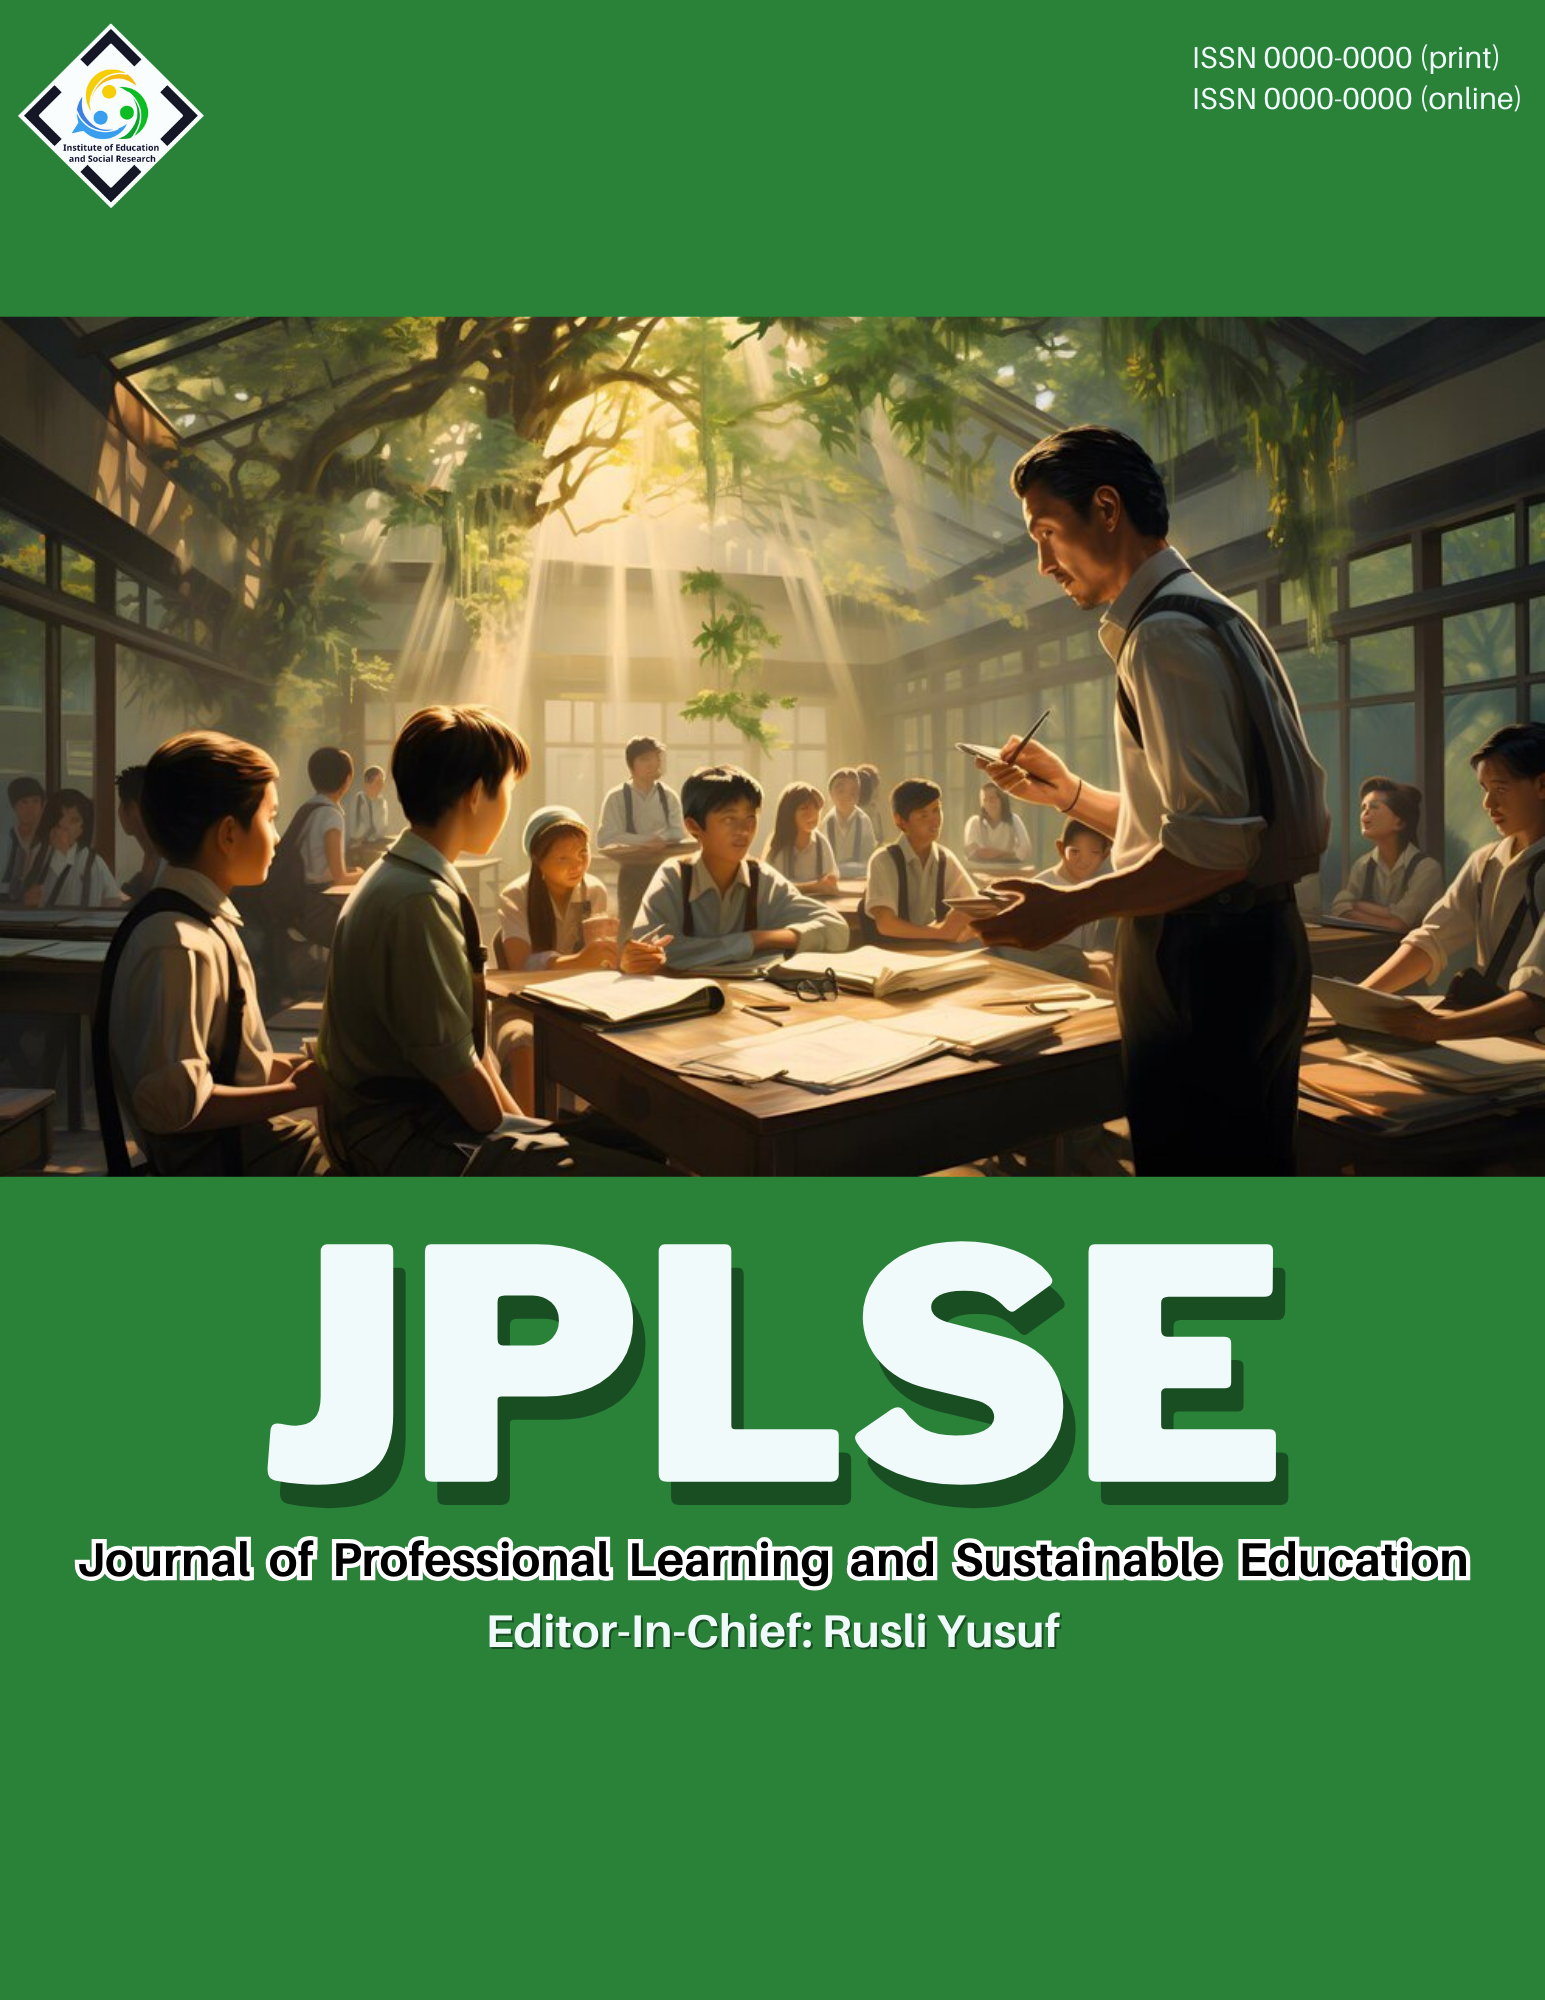 Journal of Professional Learning and Sustainable Education